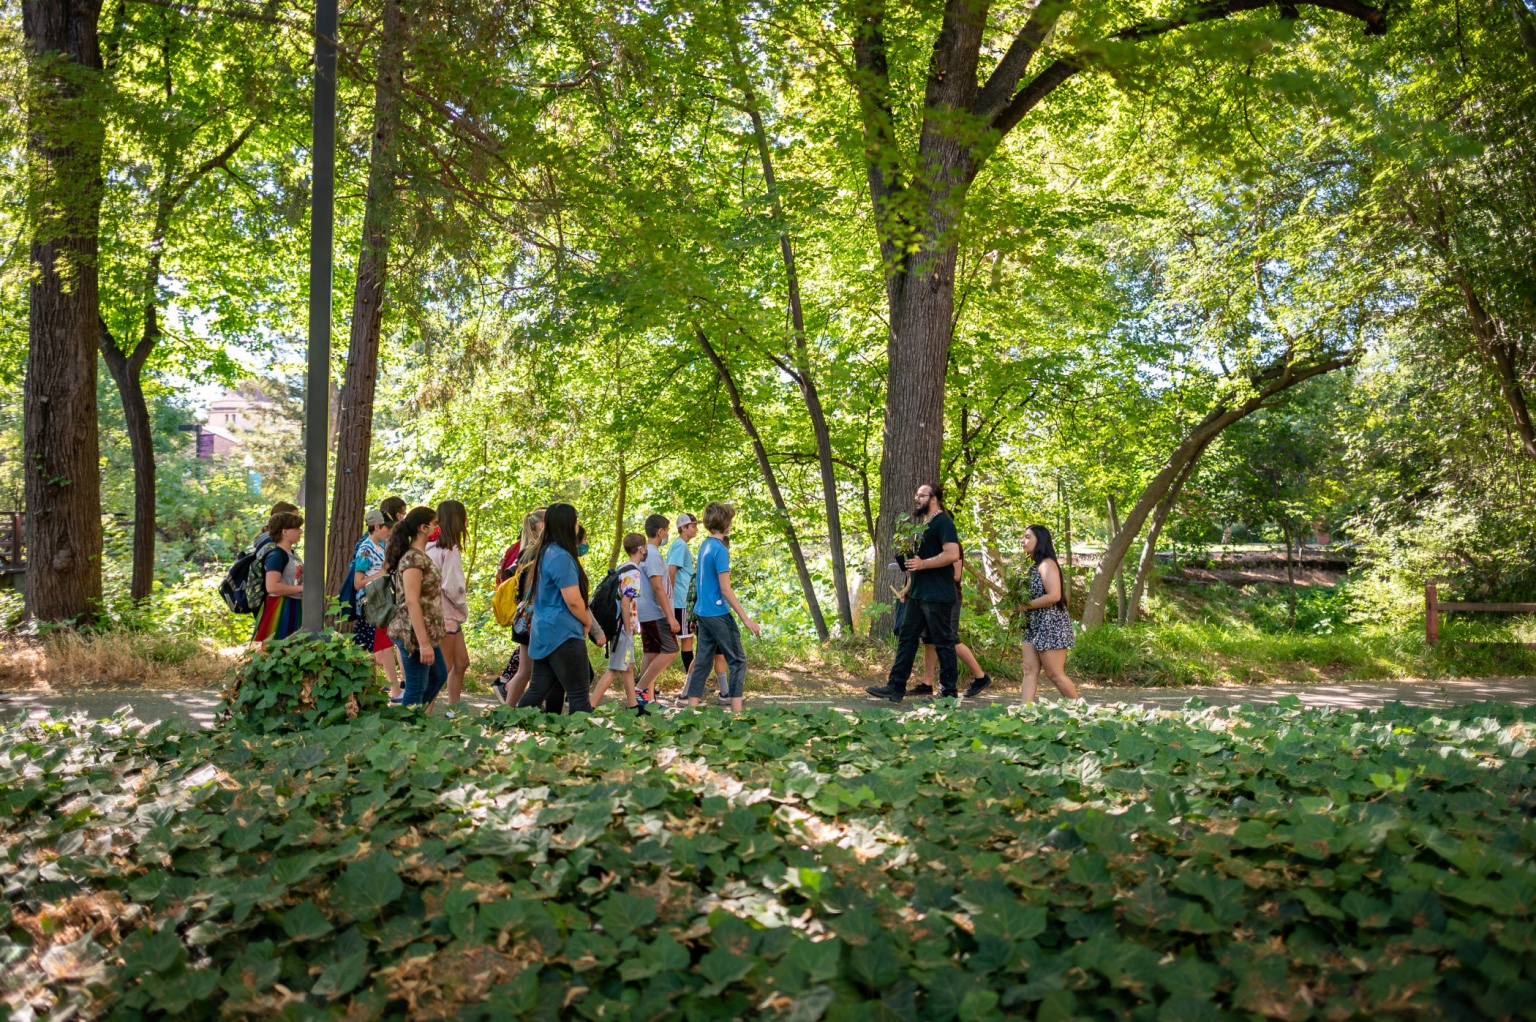 Students strolling along the banks of Big Chico Creek